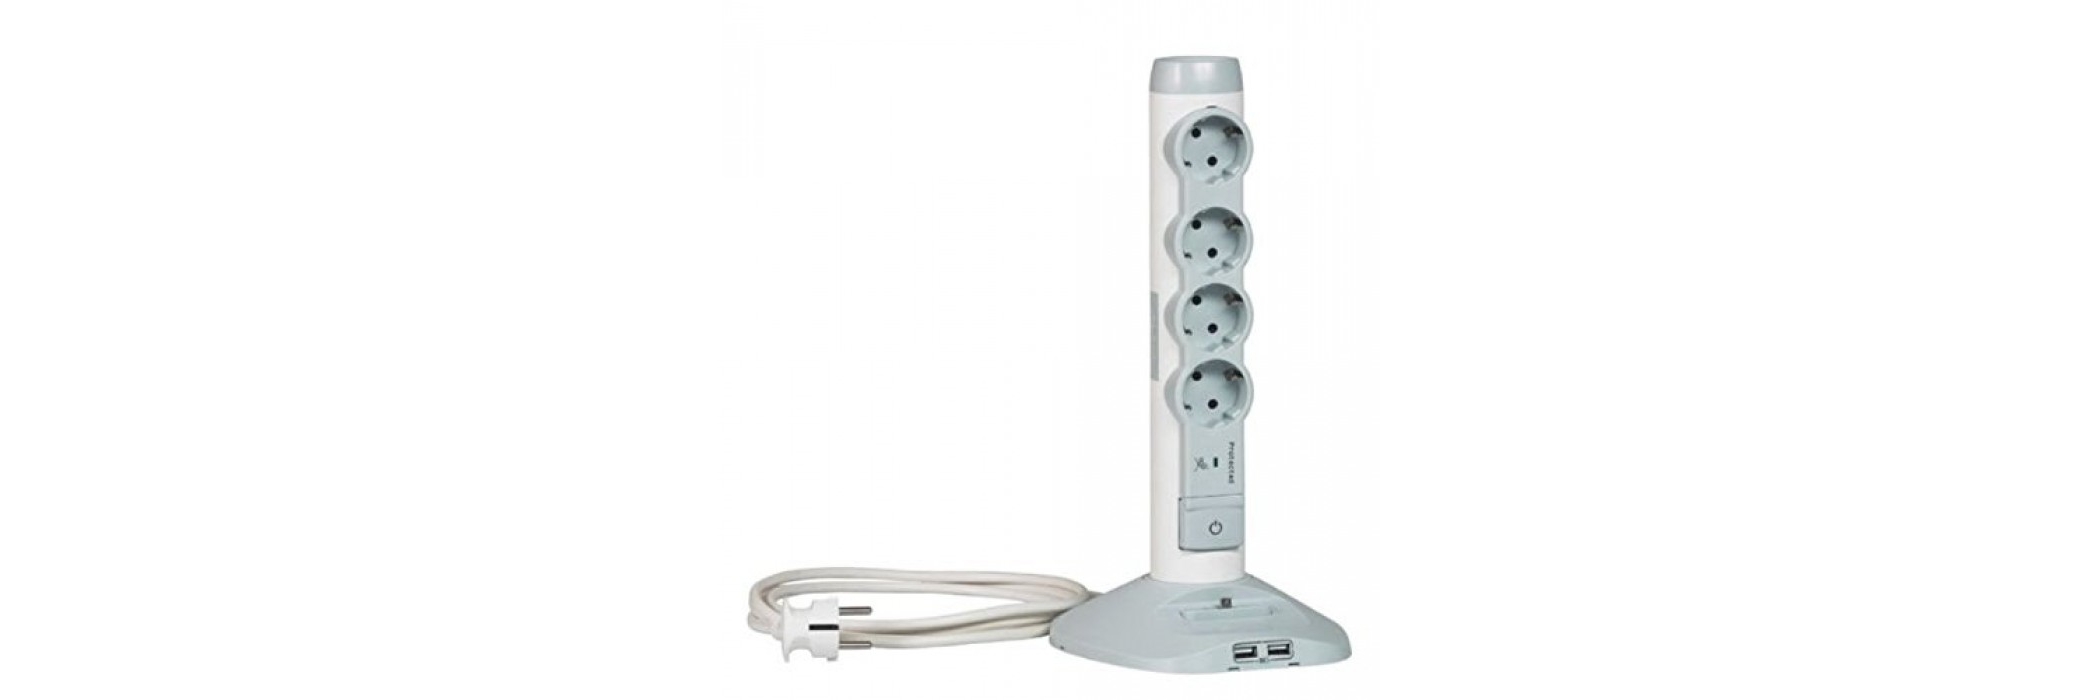 Vertical Block of Sockets - 4 x 2P + E + 1 socket with 2 USB charger sockets + 1 Micro-USB Connector with Power Supply Cord 2m